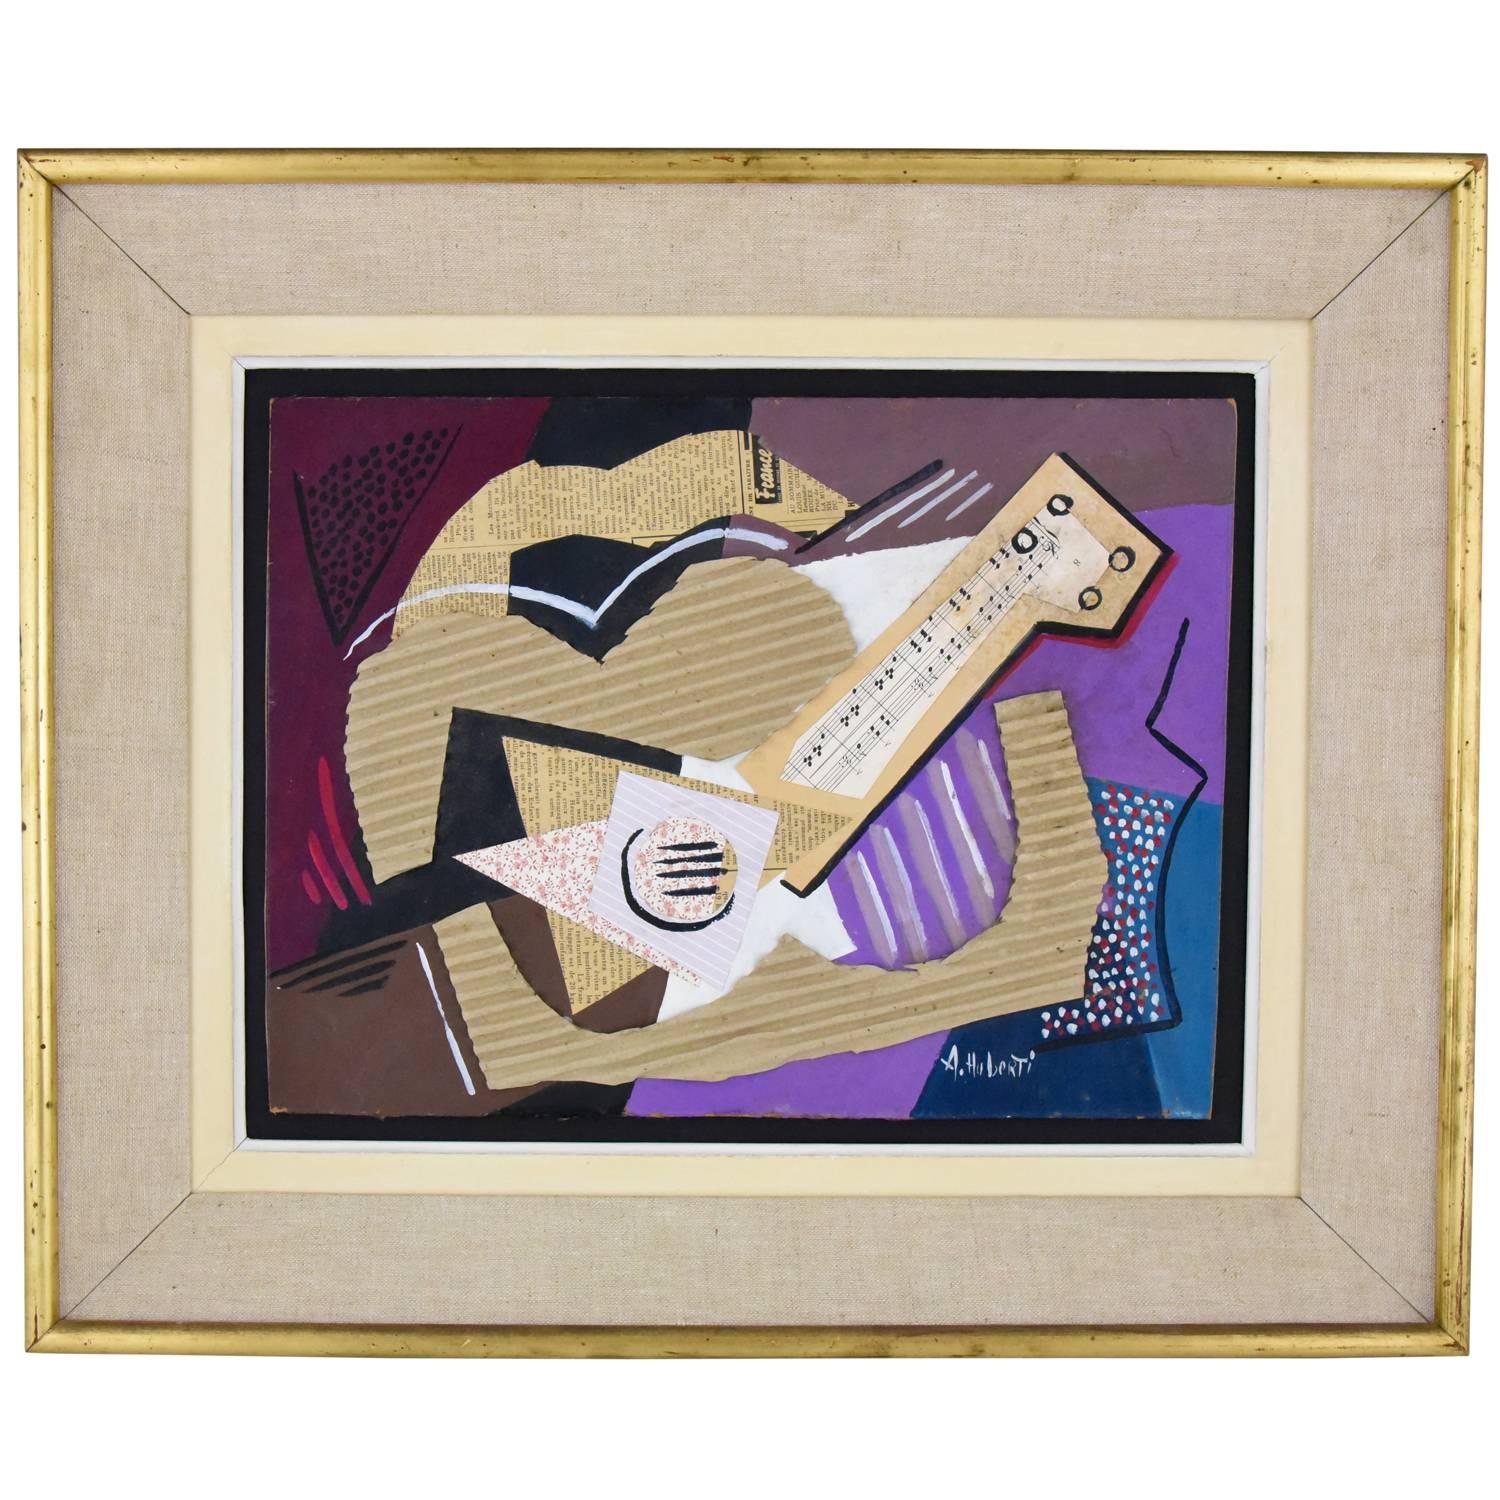 Music, Cubist Collage with Guitar and Staff Paper by Antonio Huberti, 1940